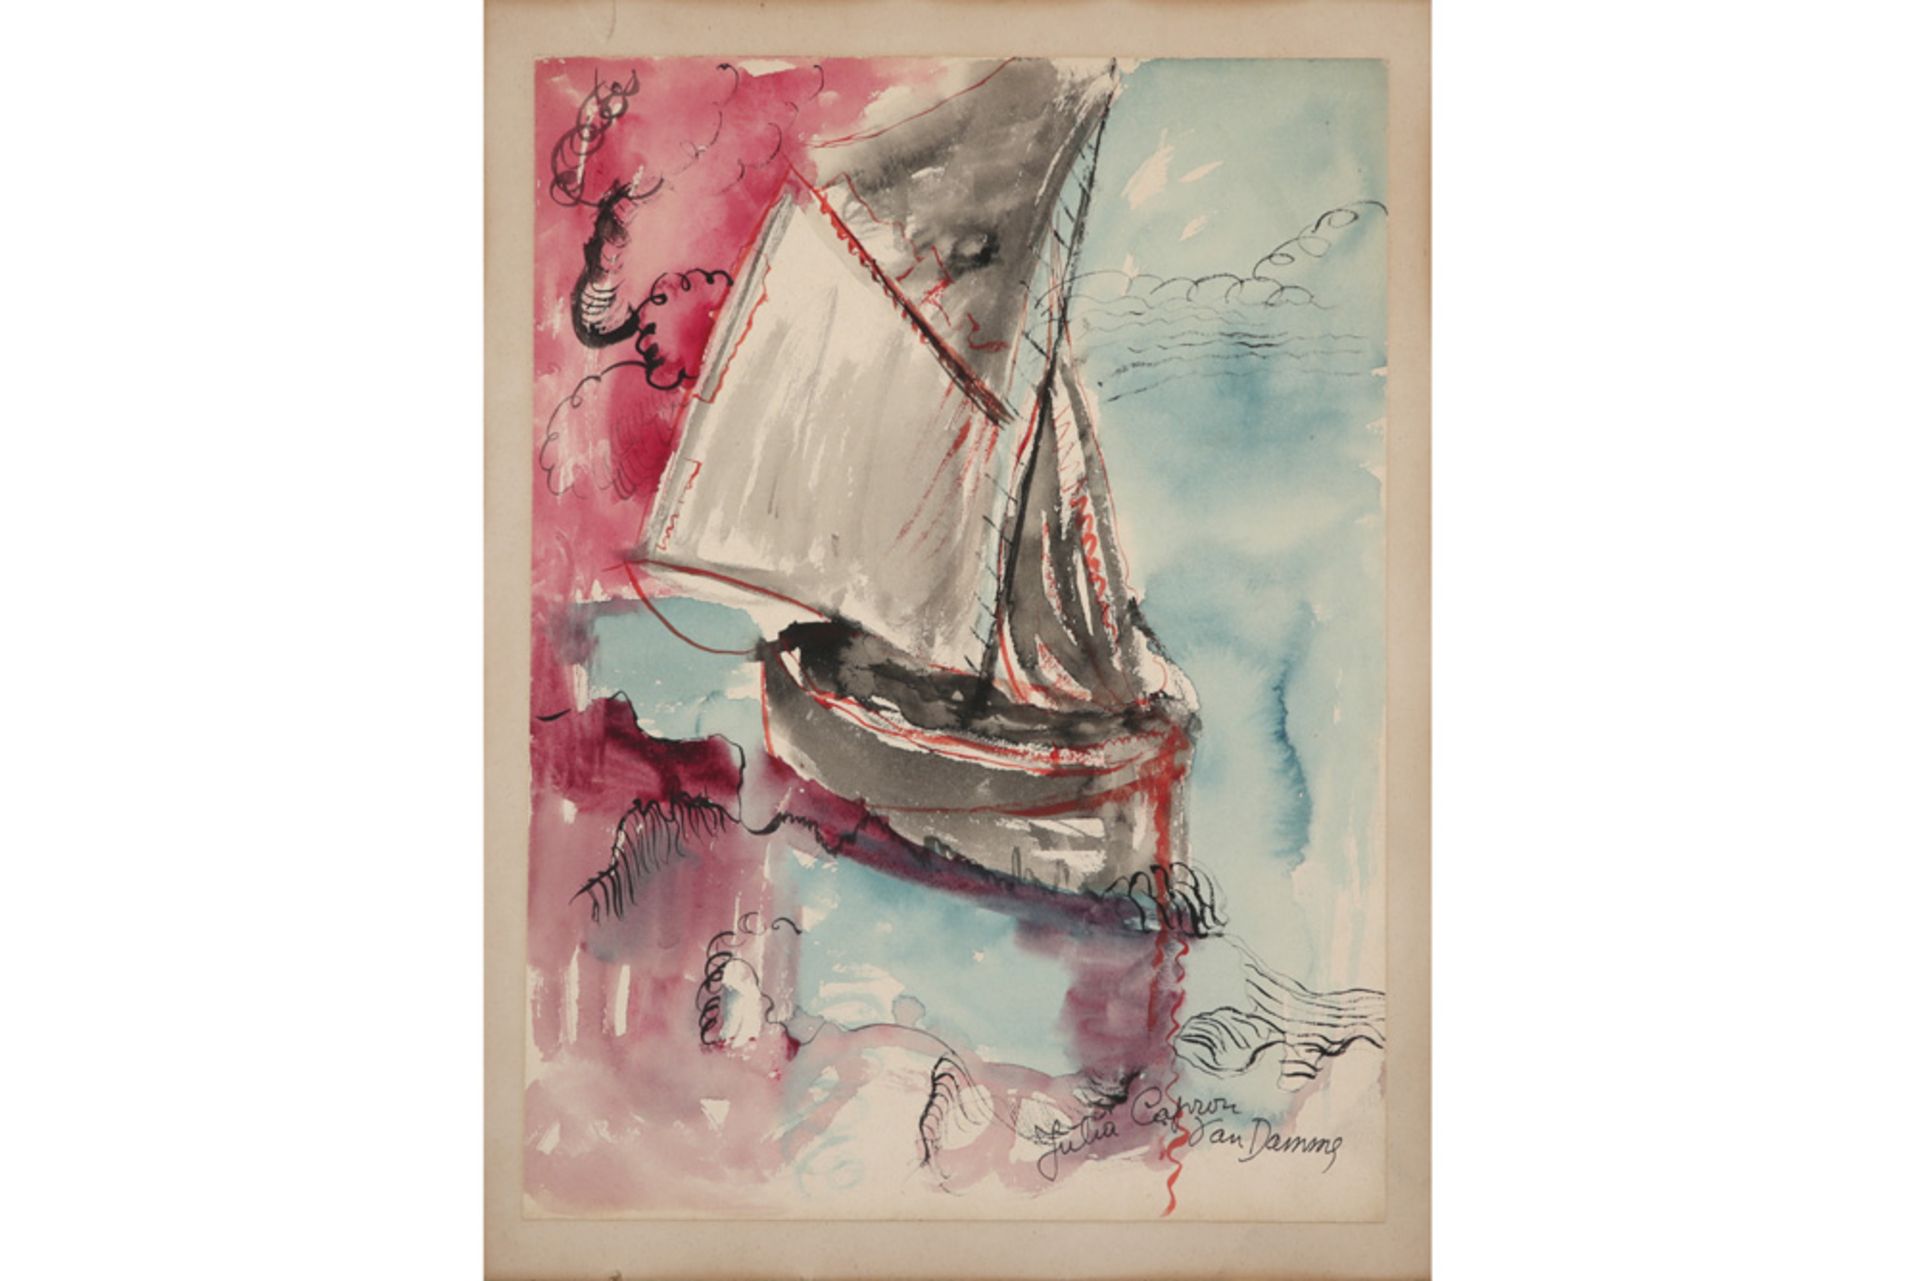 20th Cent. Belgian aquarelle - signed Julia Capron-Van Damme and dated 1965 - with a dedication on